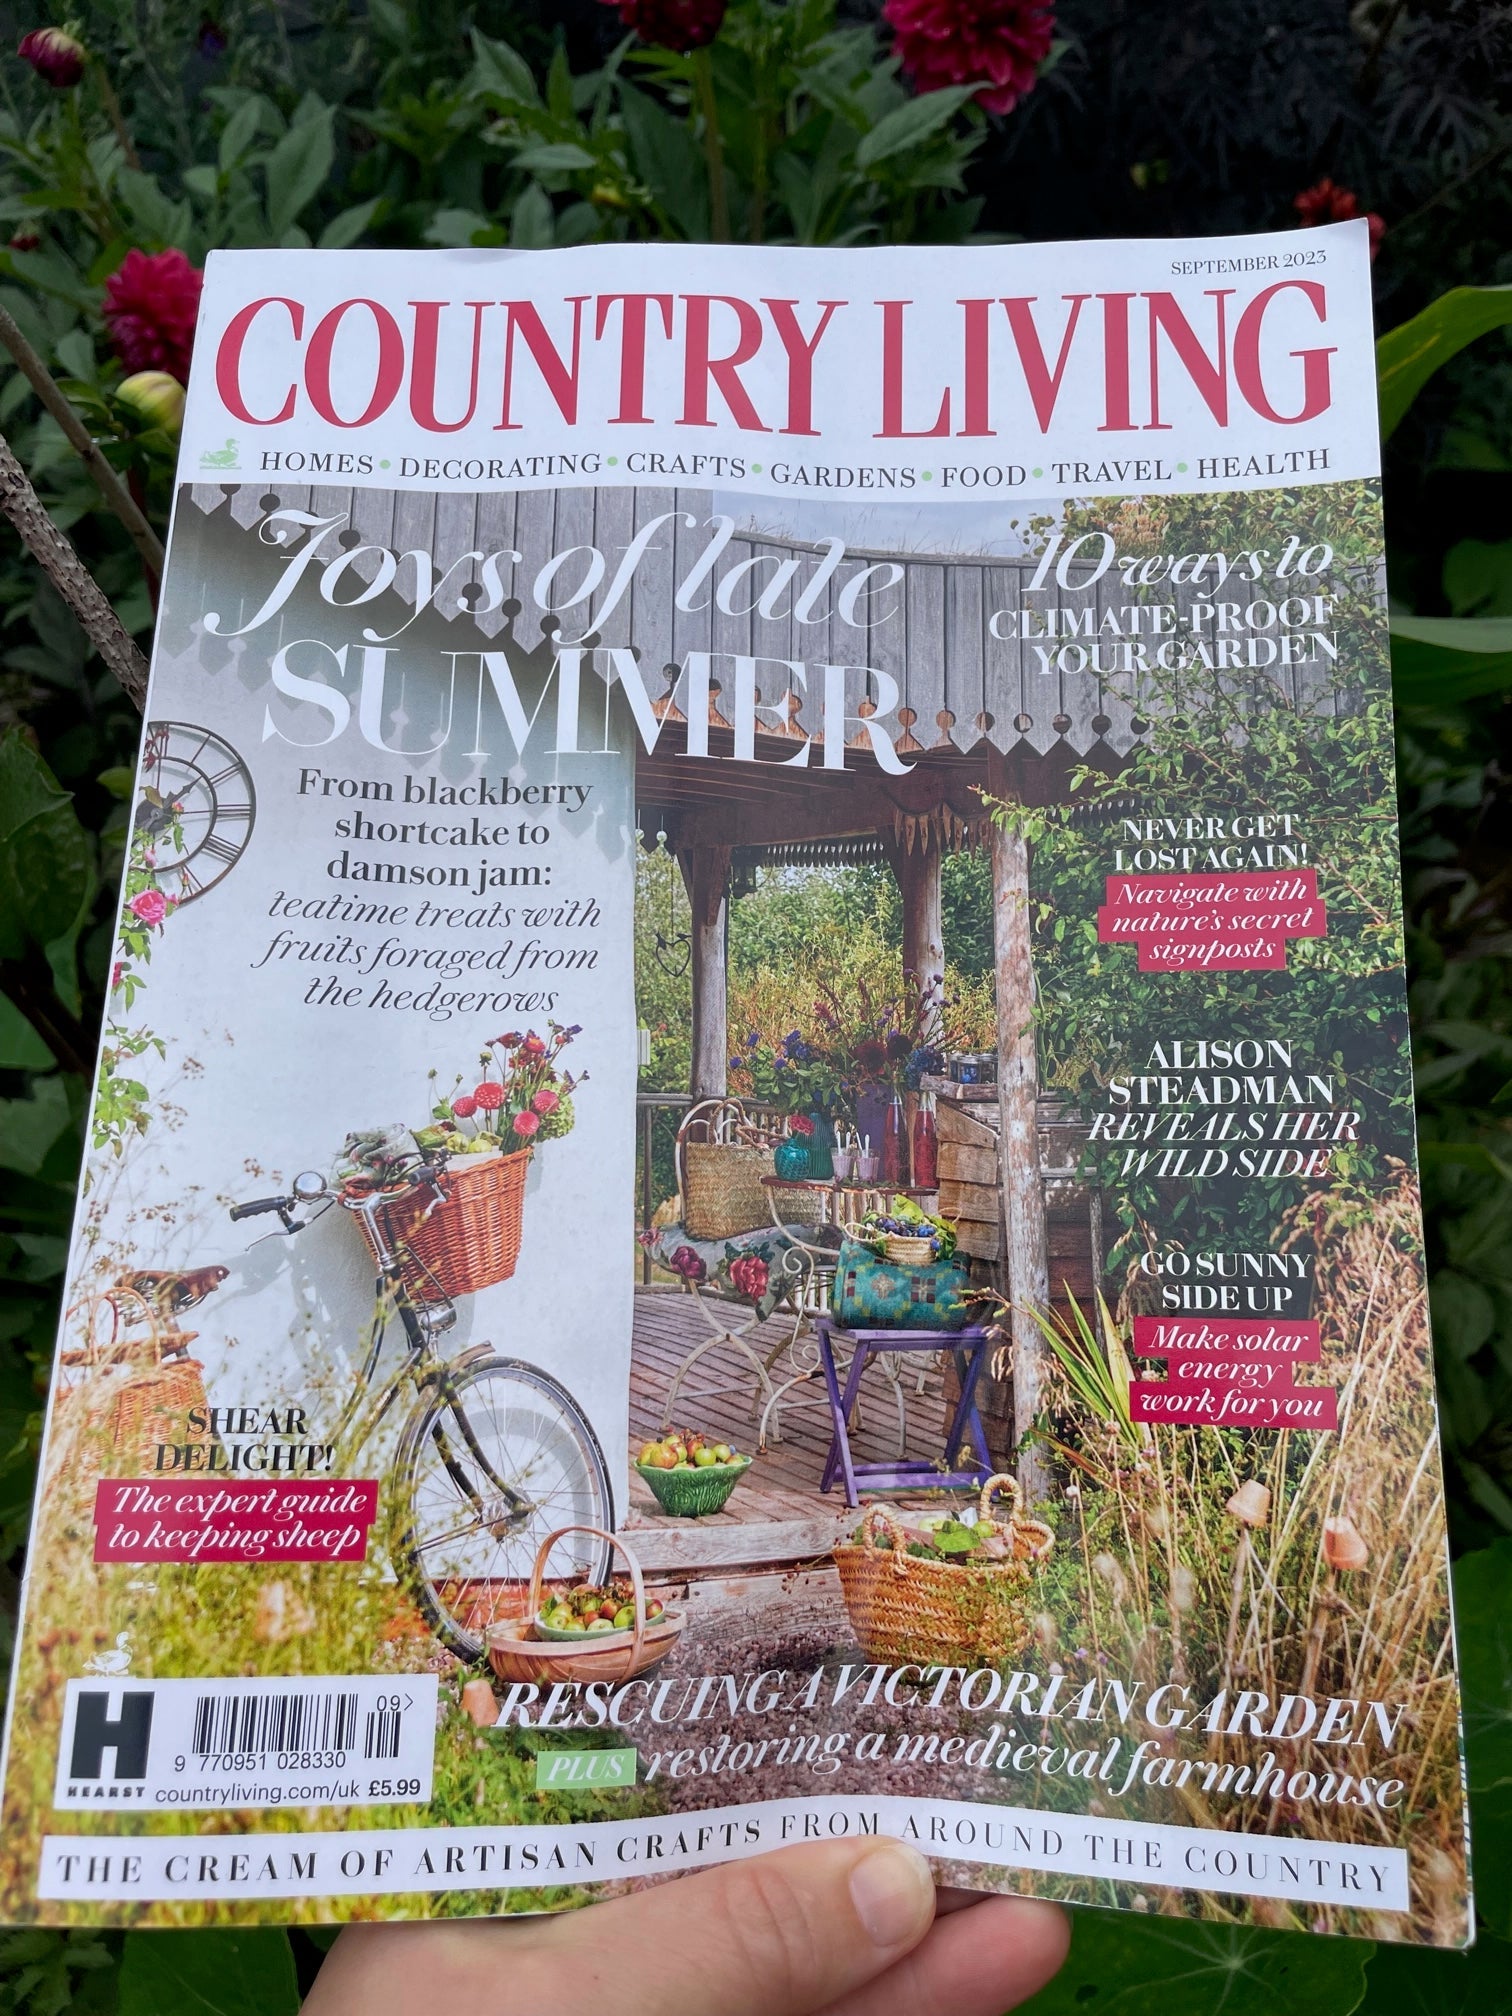 Goldfinch on Teasel Garden Stem featured in Country Living!